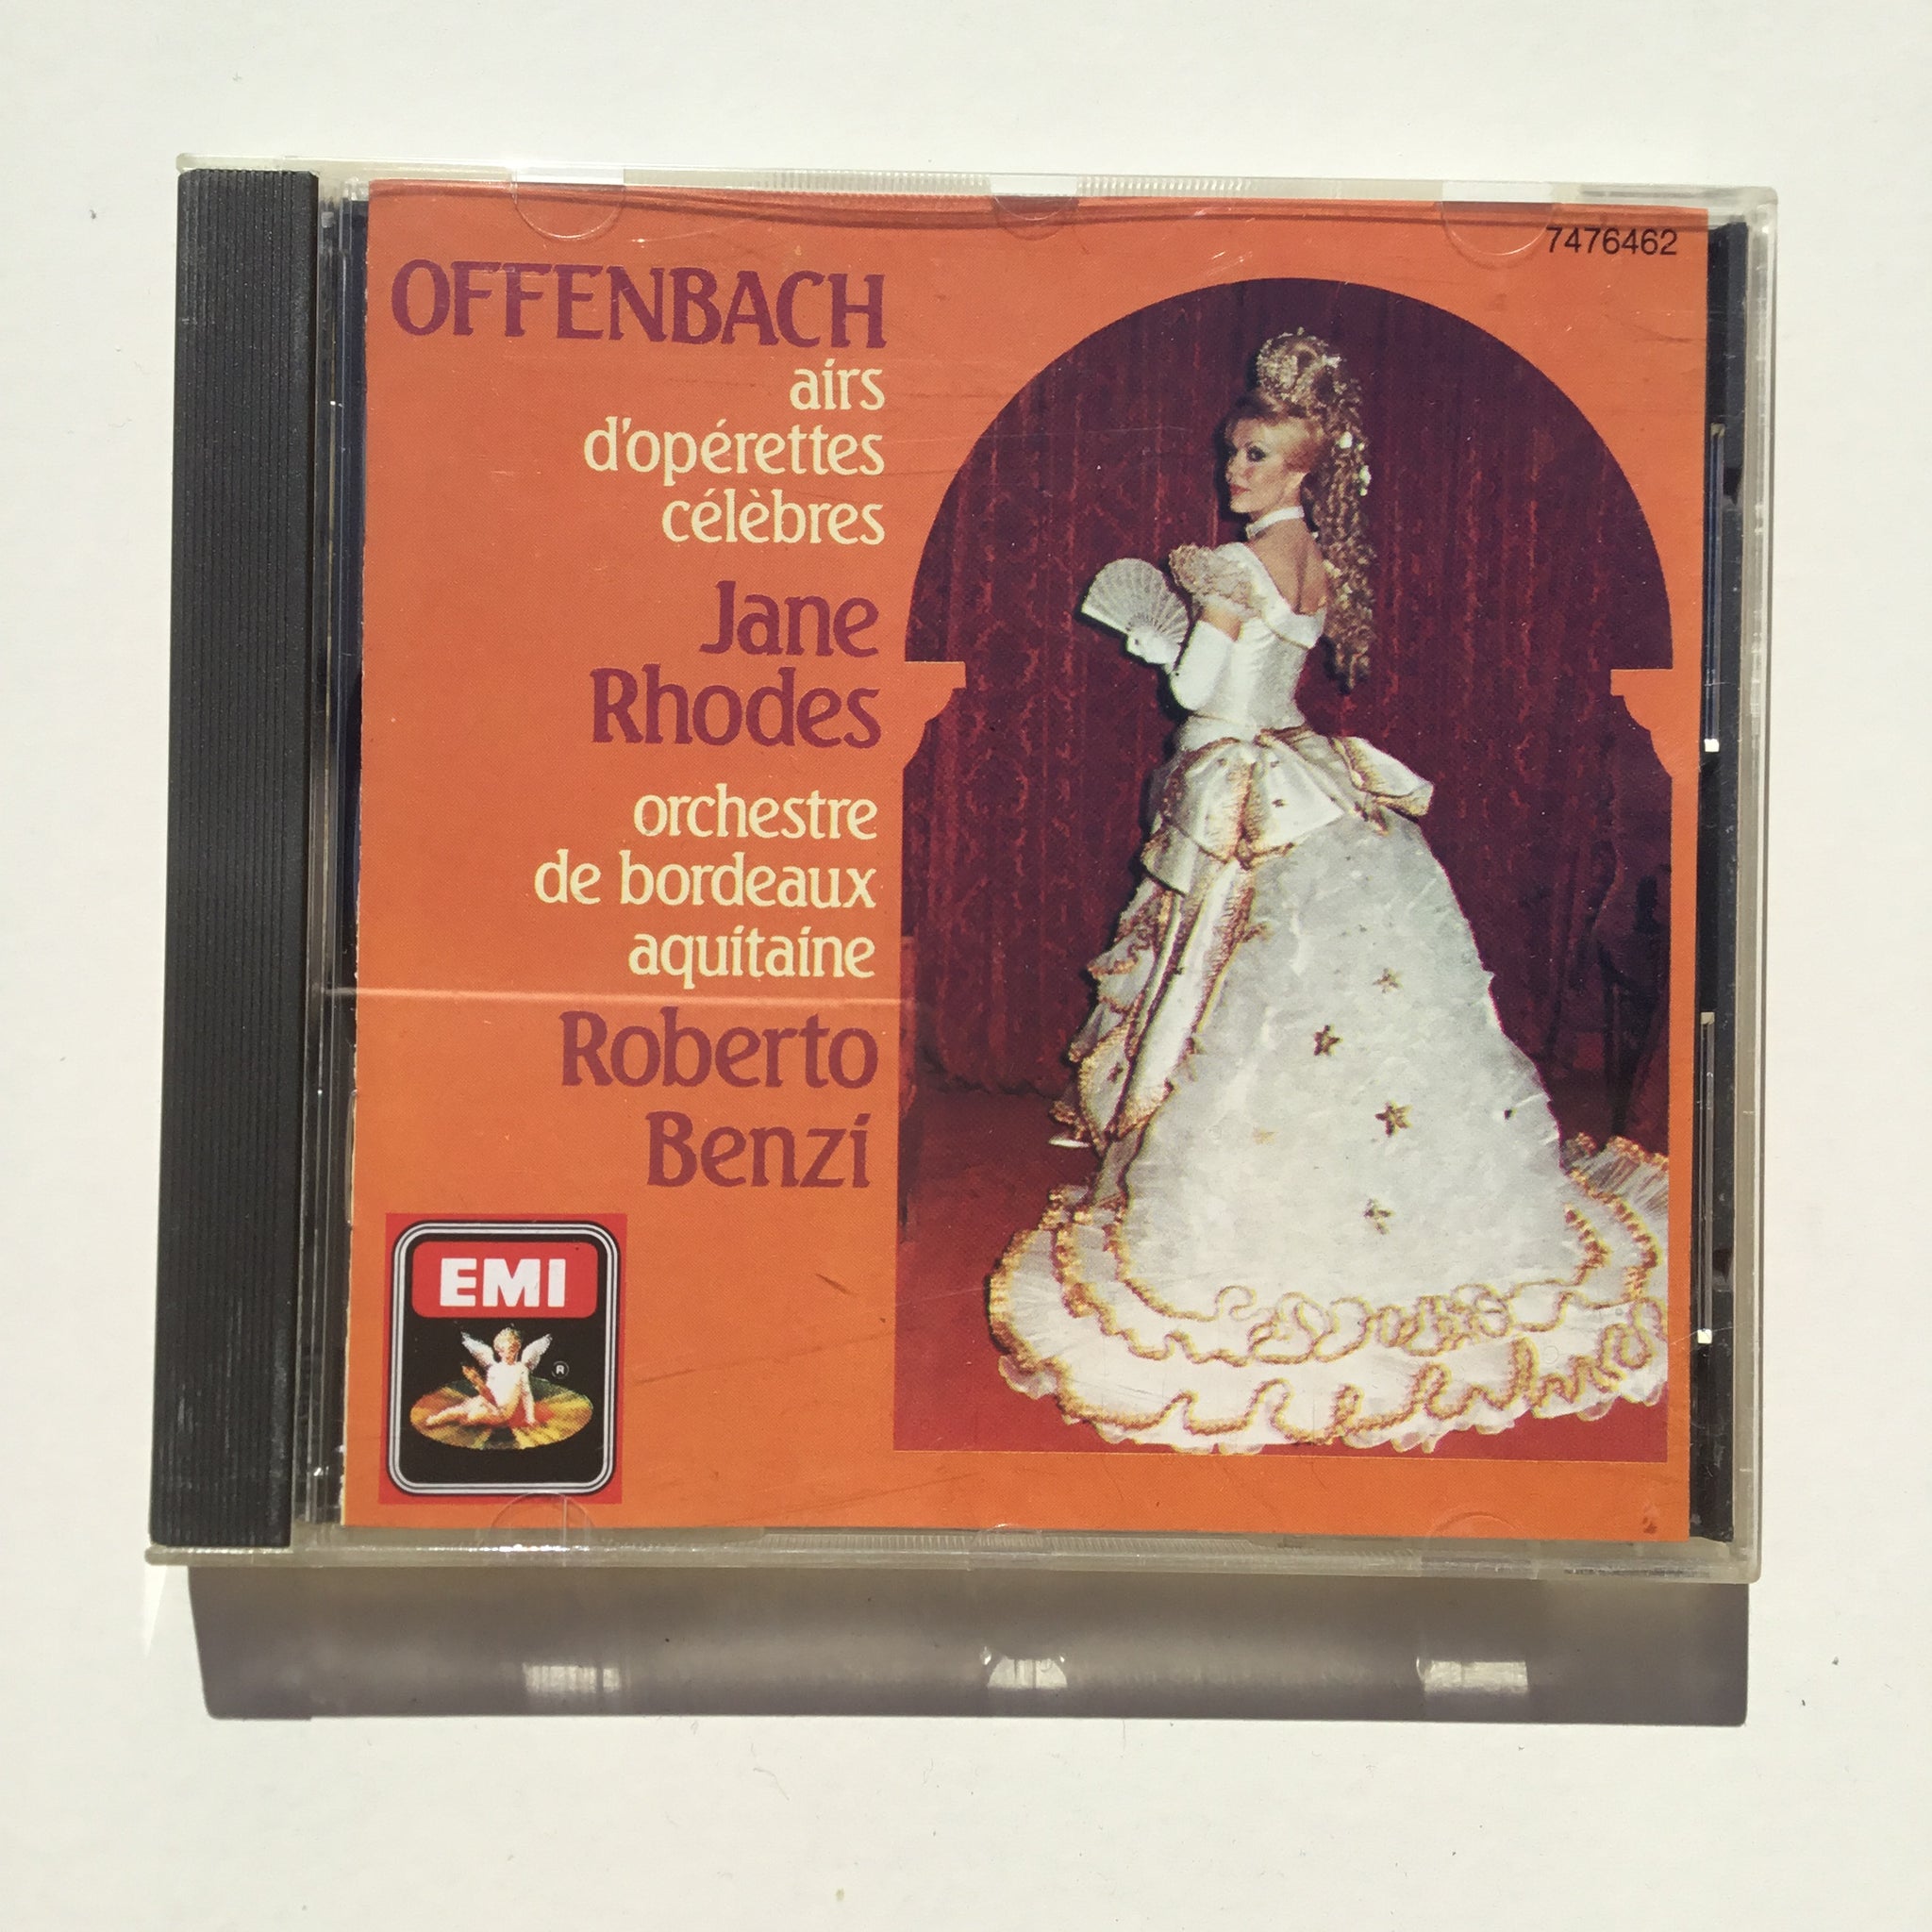 Jane Rhodes: Offenbach Airs D'Operettes Celebres (CD)